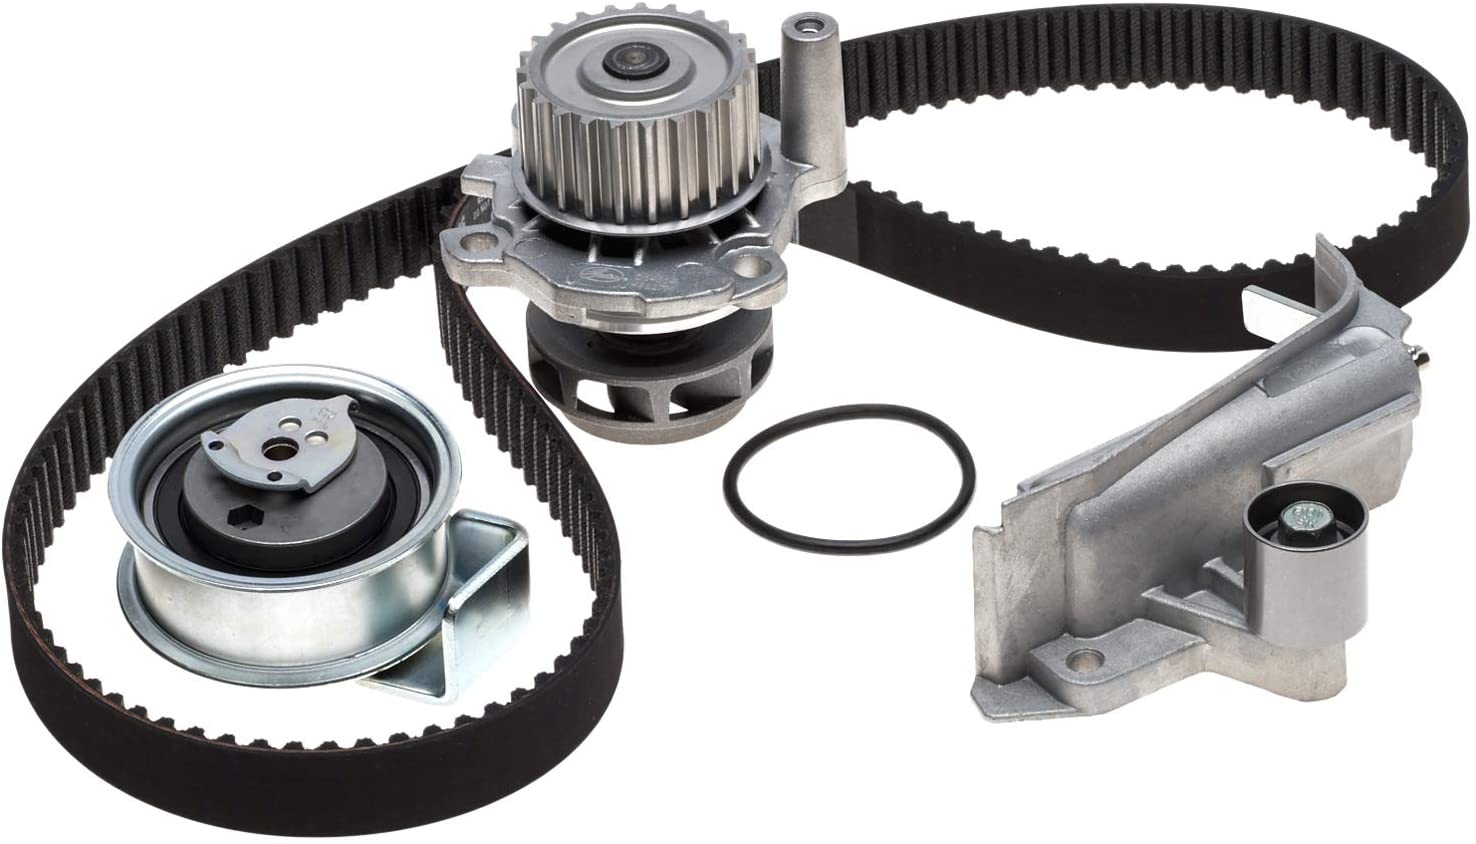 ACDelco TCKWP306AM Professional Timing Belt and Water Pump Kit with 2 Tensioners